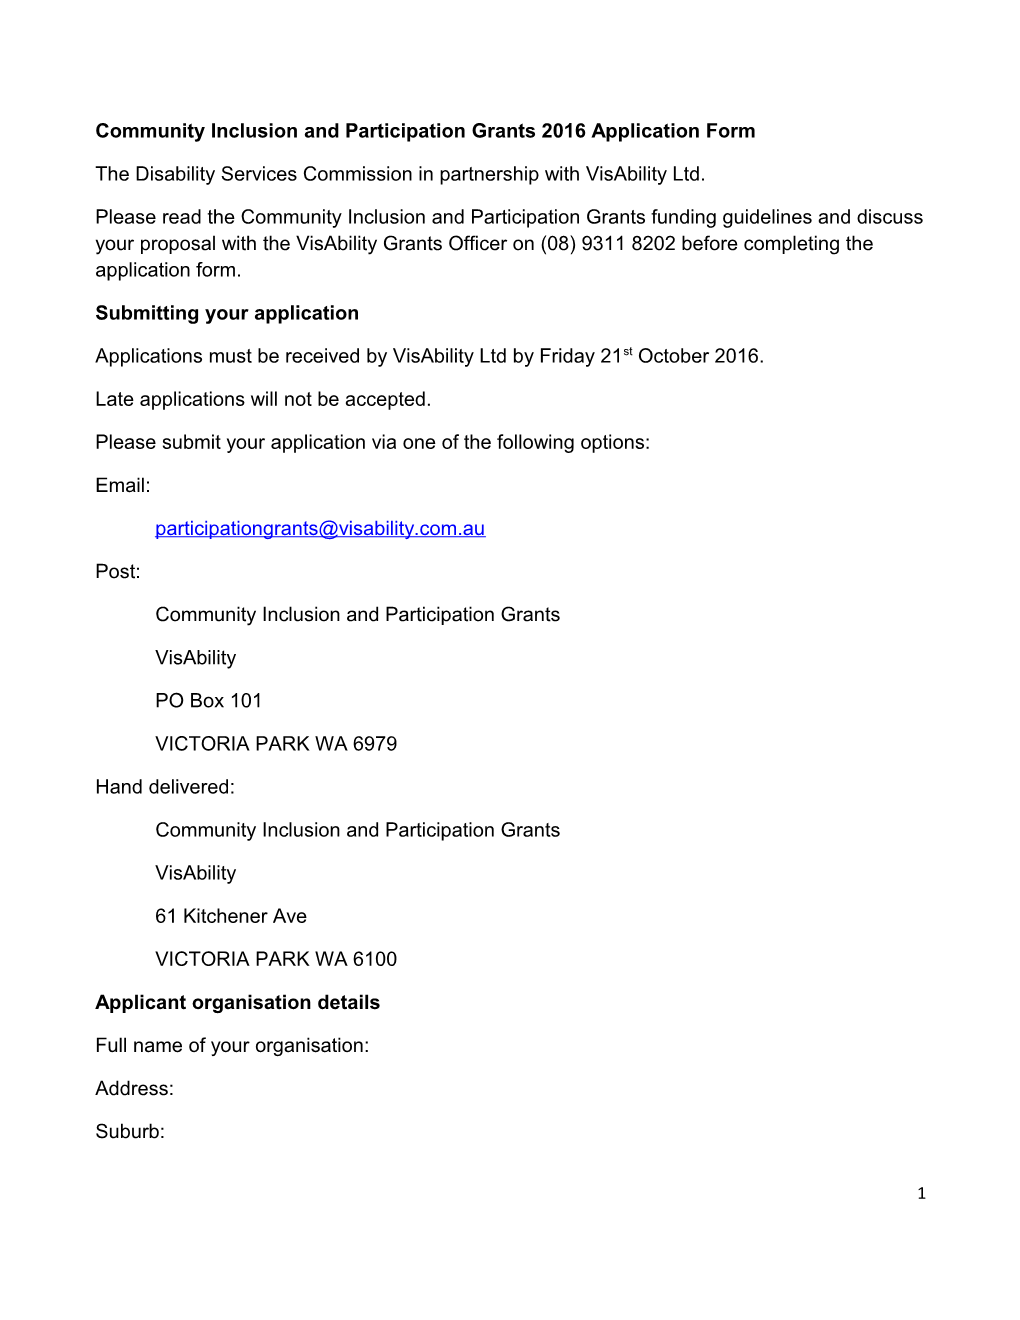 Community Inclusion and Participation Grants 2016 Application Form